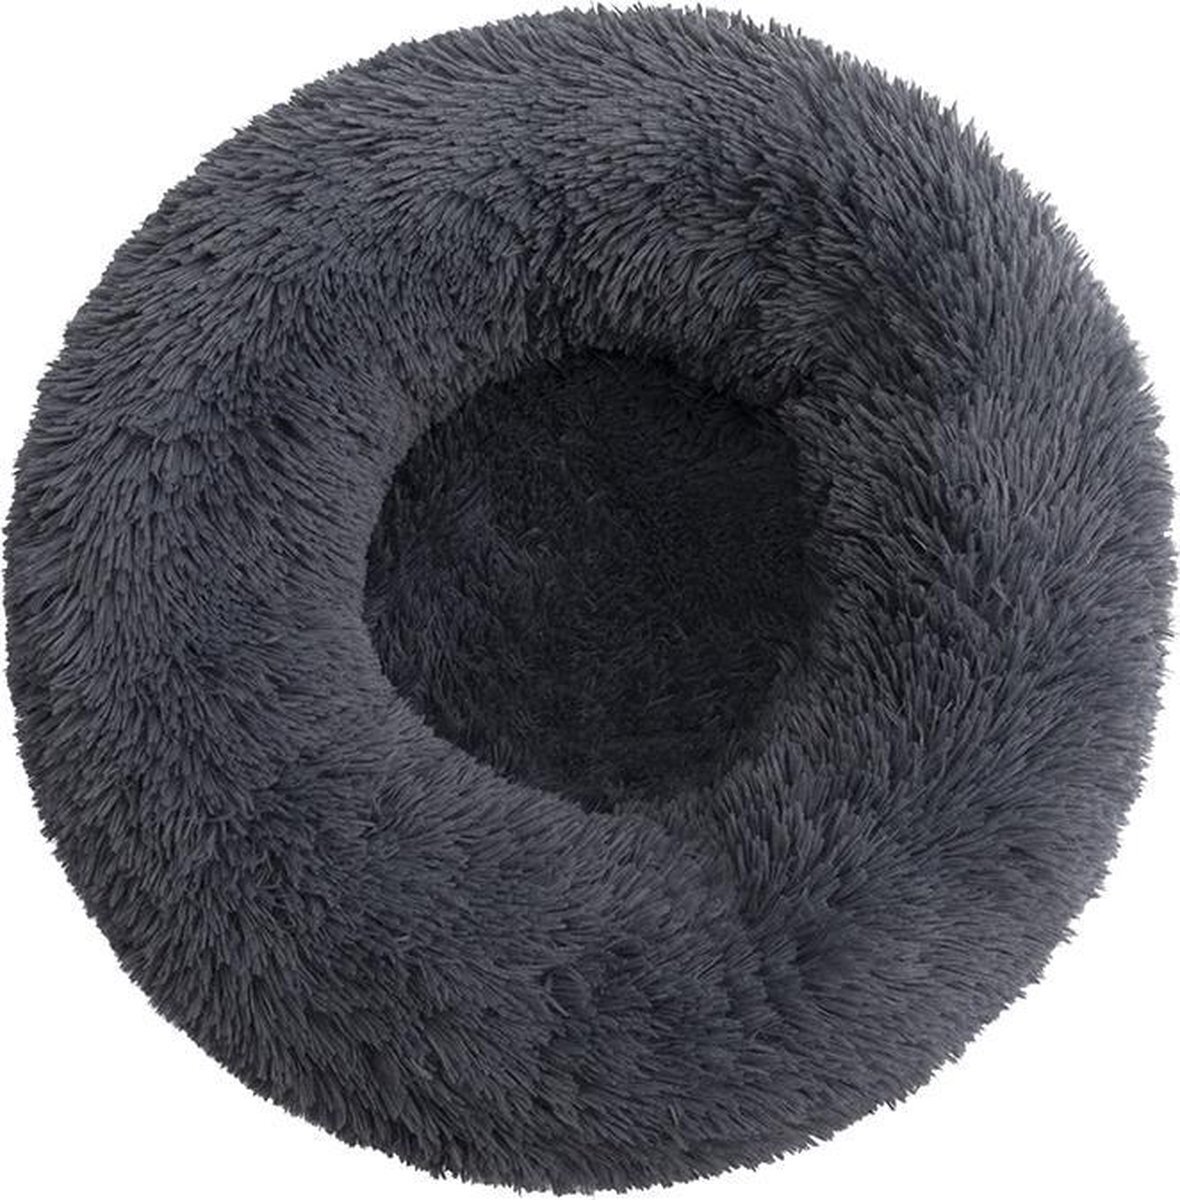 BEESSIES BEESSIES® donut hondenmand/kattenmand 60 cm - wasbare hoes - Antraciet donkergrijs - huisdierbed hond mand